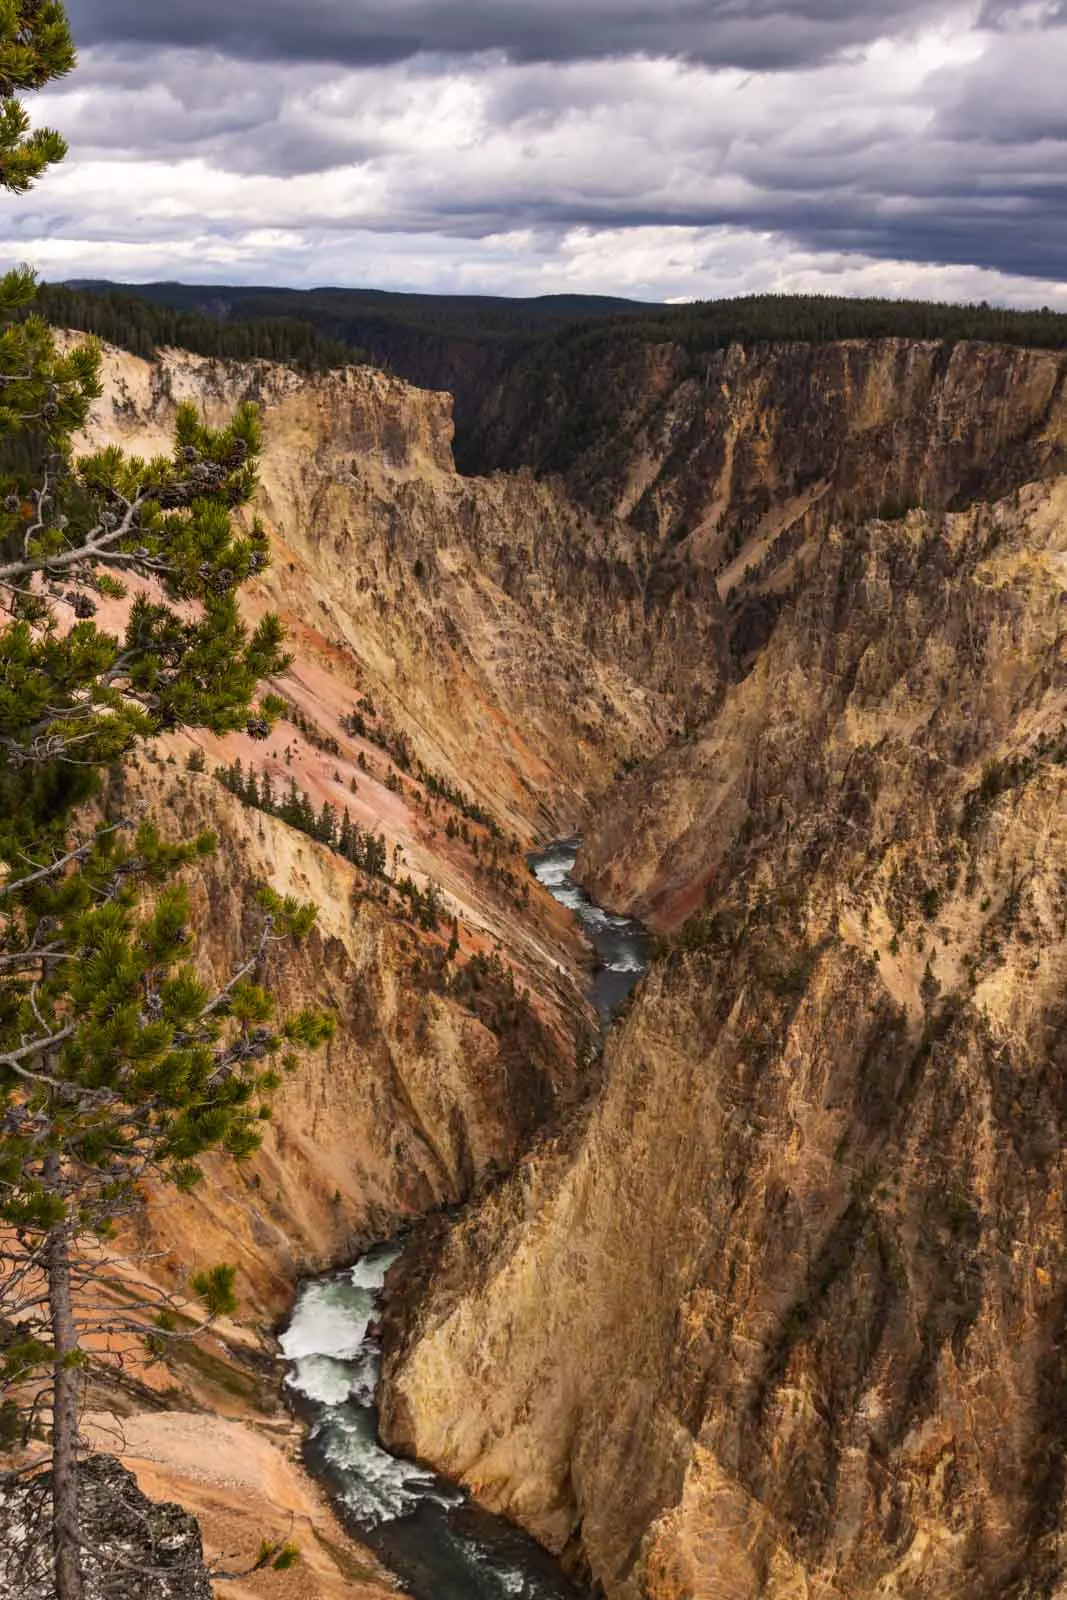 Grand View is another fun thing to do in Yellowstone